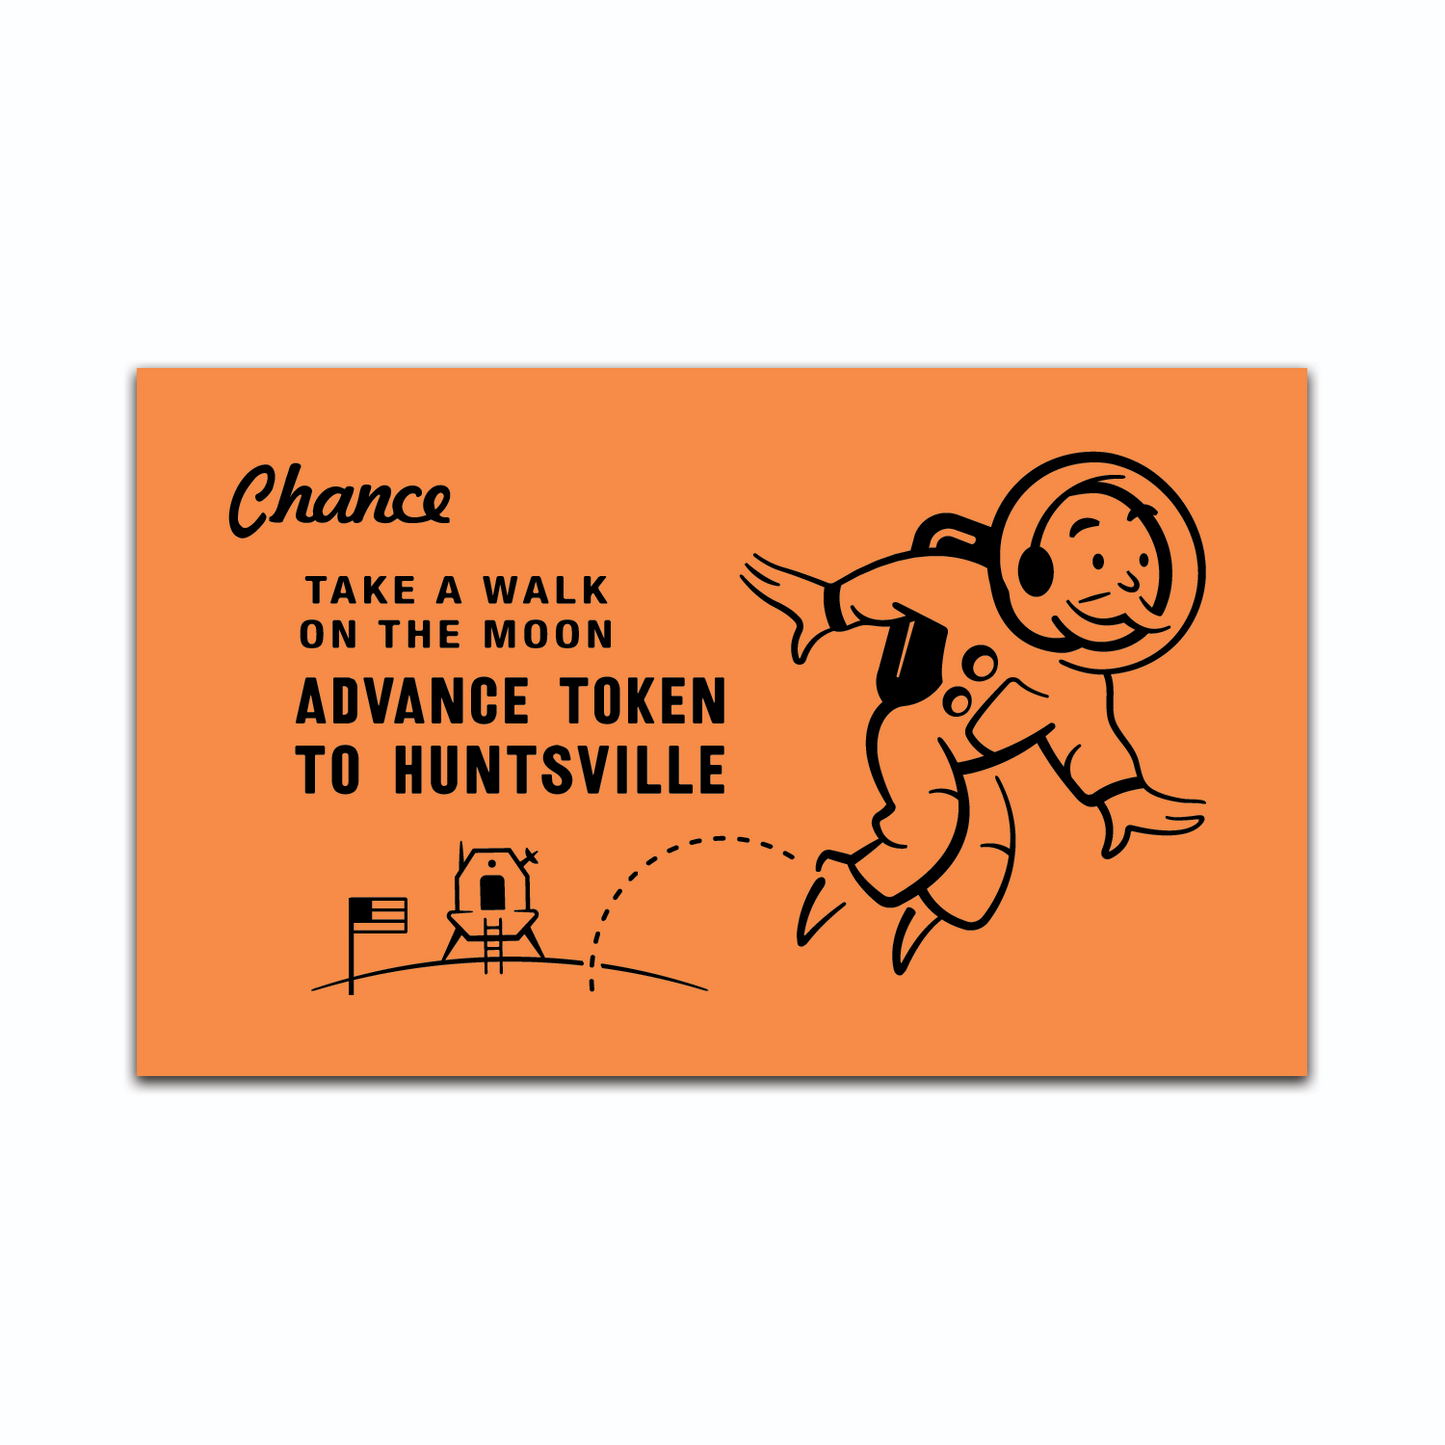 Image of Monopoly man on the moon with text " Chance; Take a walk on the moon; Advance token to Huntsville" on orange sticker